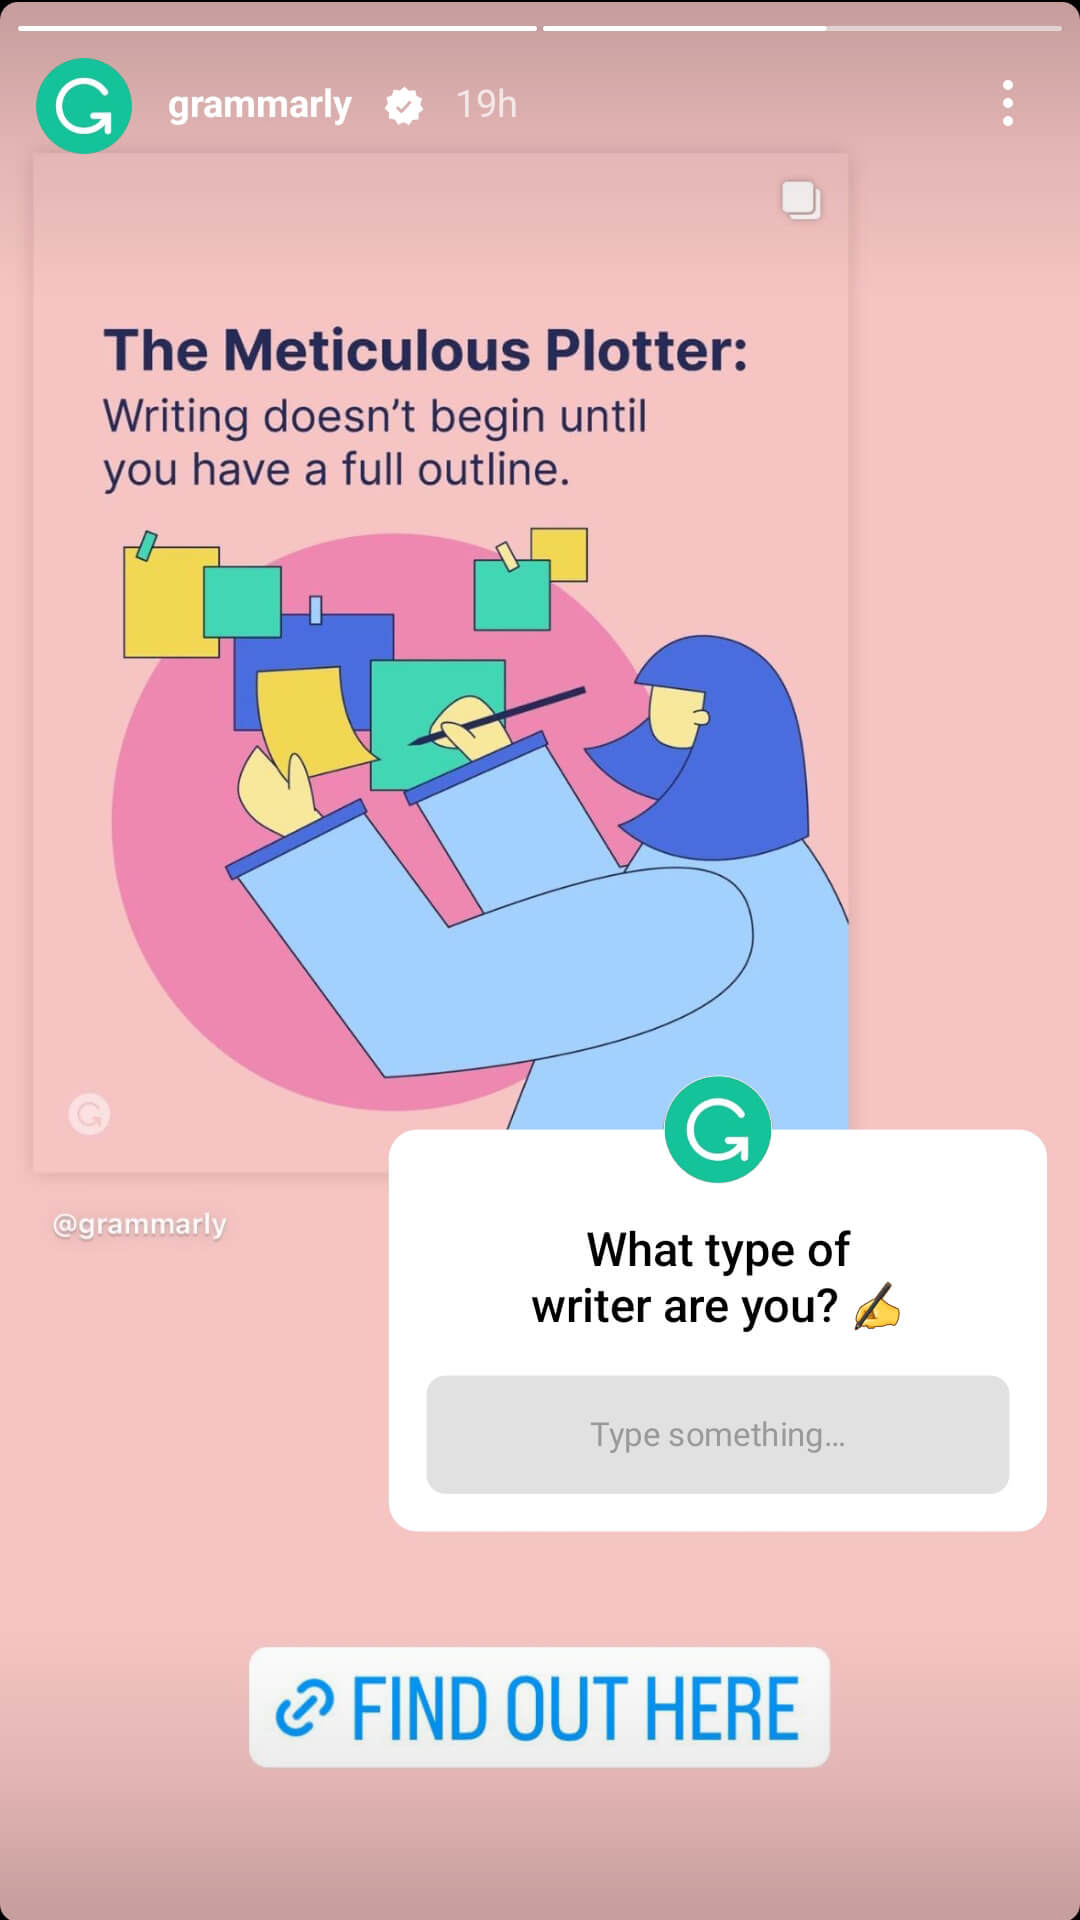 how-to-publish-instagram-stories-regularly-boost-engagement-audiences-attention-story-includes-feed-post-share-and-question-invites-viewers-to-interact-link-sticker-grammarly-example-6